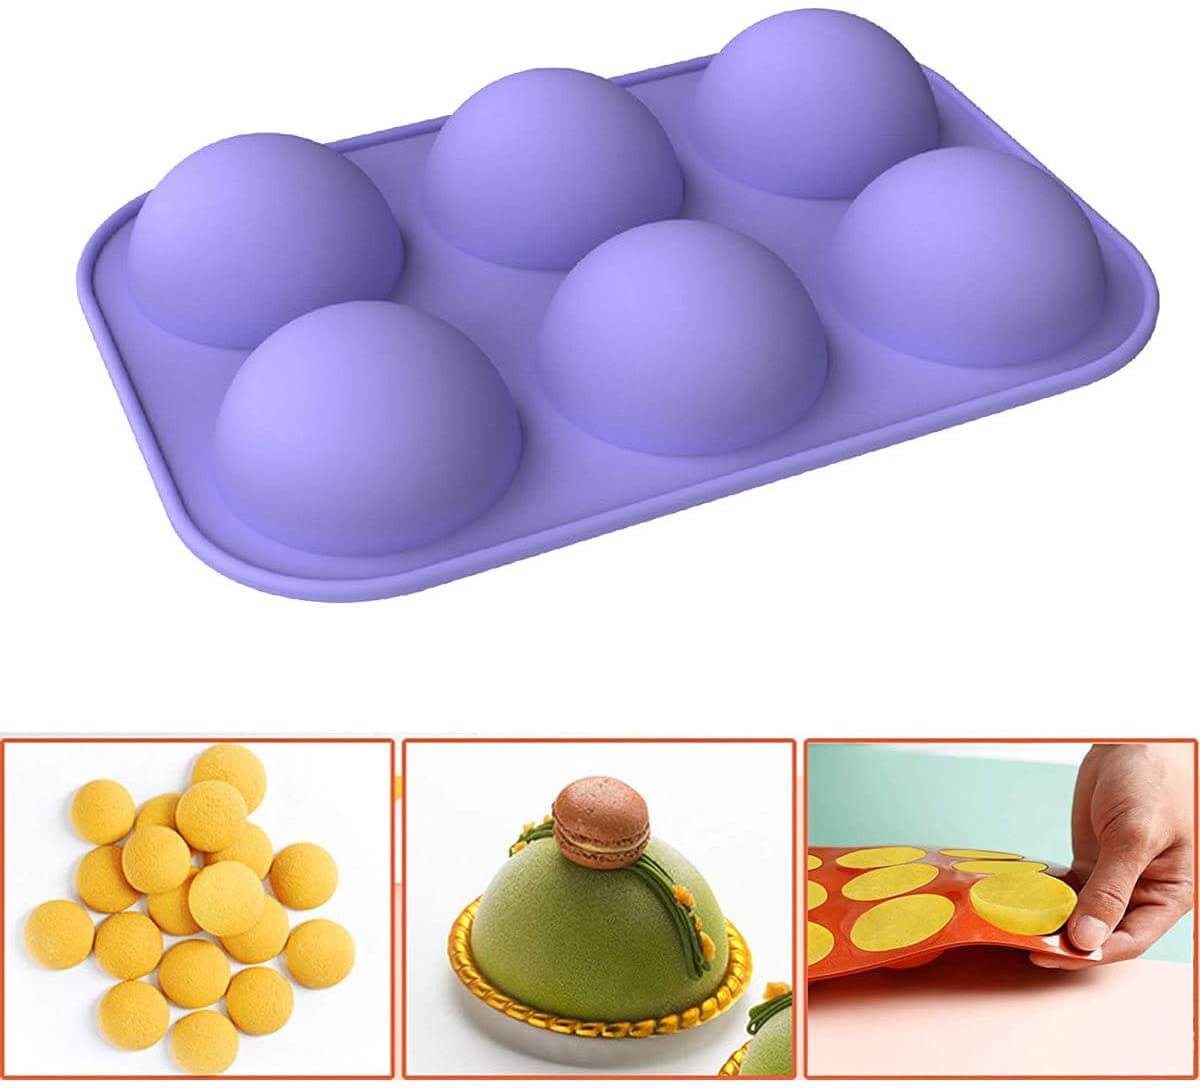 2 Packs Professional Silicone Molds for Baking Silicone Molds for Chocolate Cake Silicone Molds Dome Mousse Jelly 